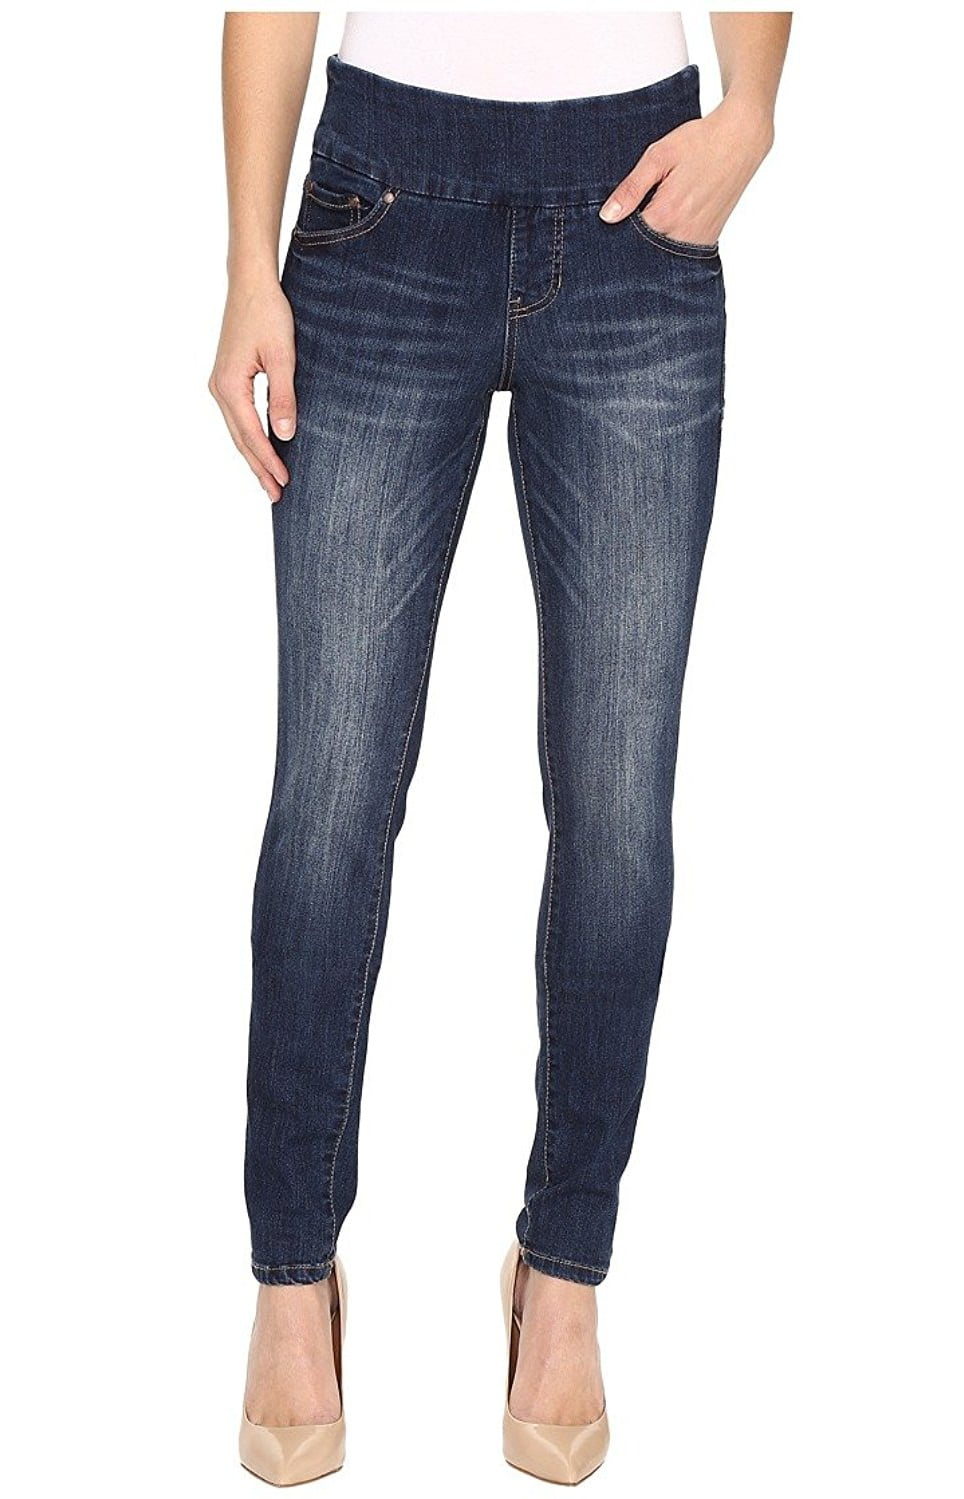 JAG Jeans - Jag Nora High Rise Skinny Pull On Jeans - Walmart.com ...